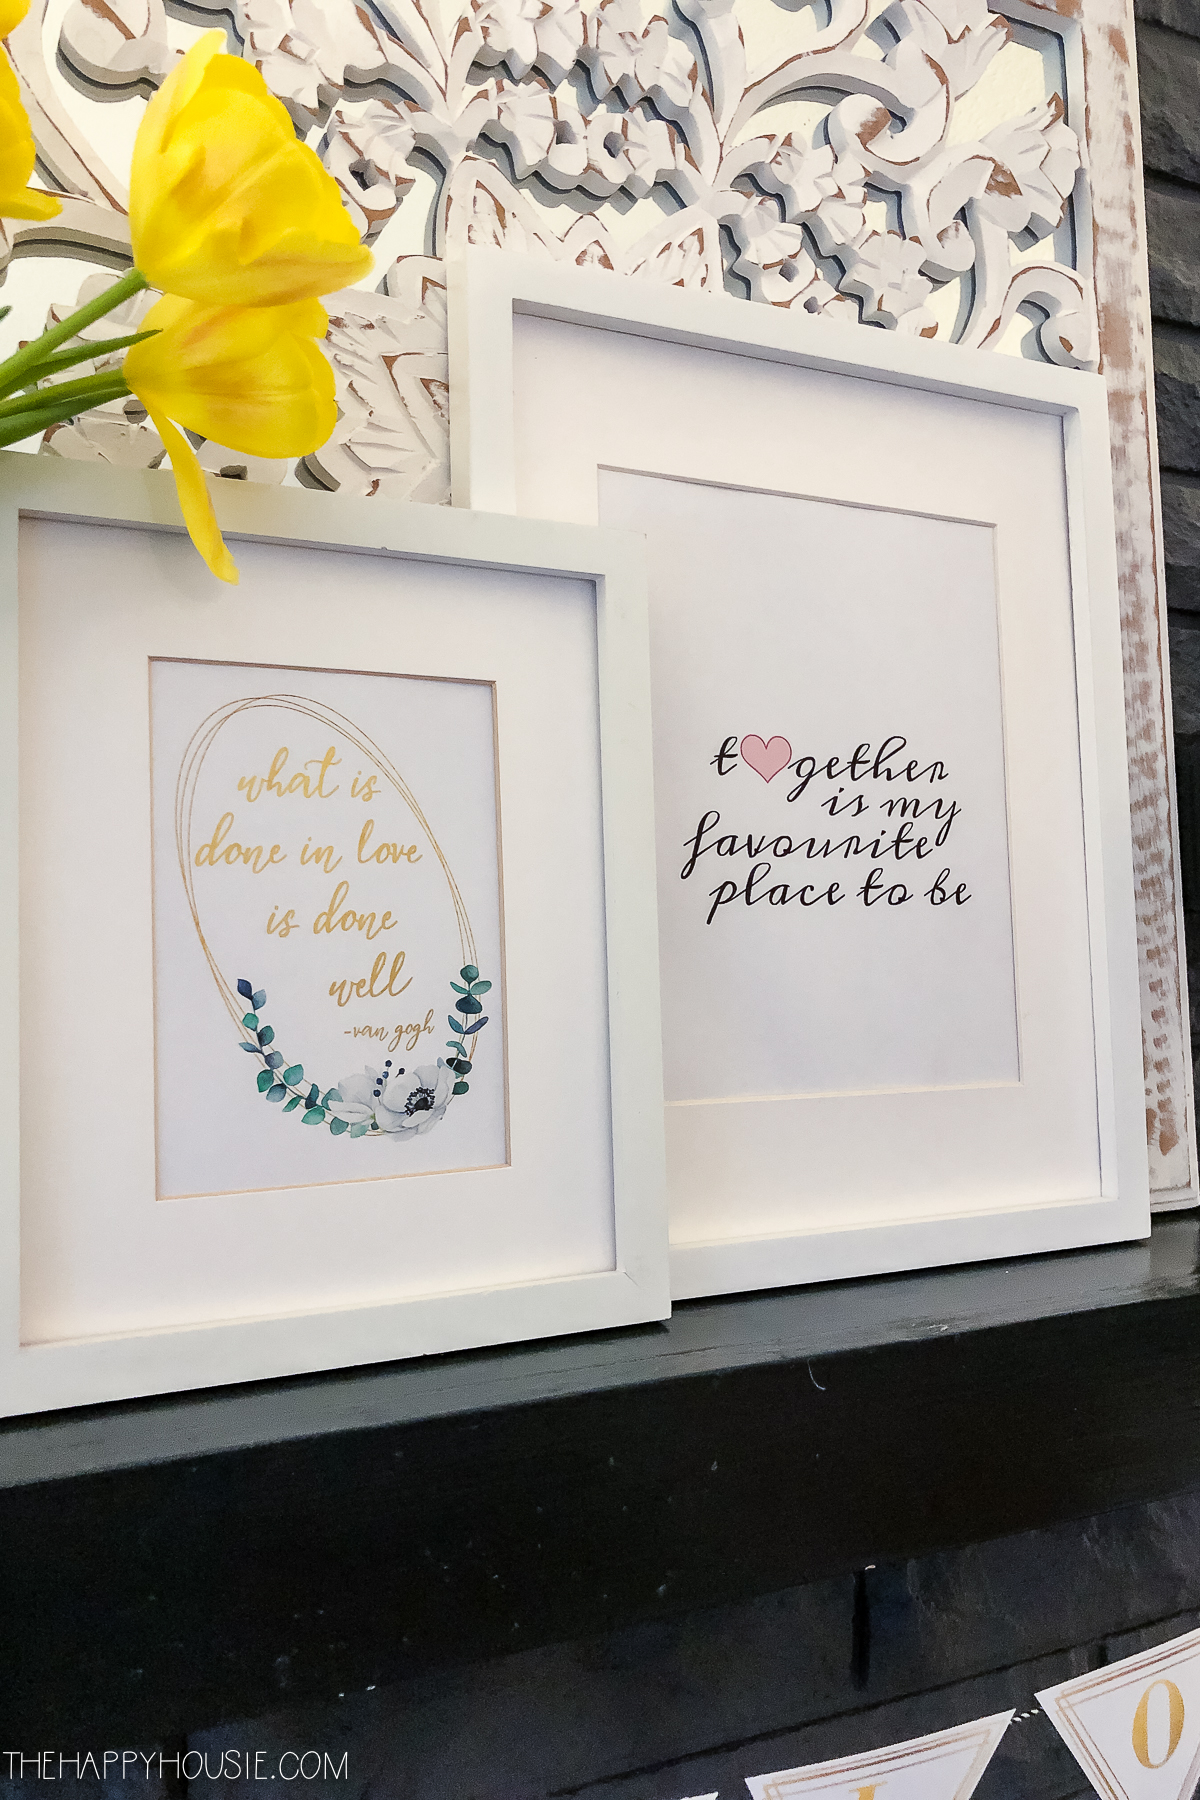 The framed quotes and yellow flowers.